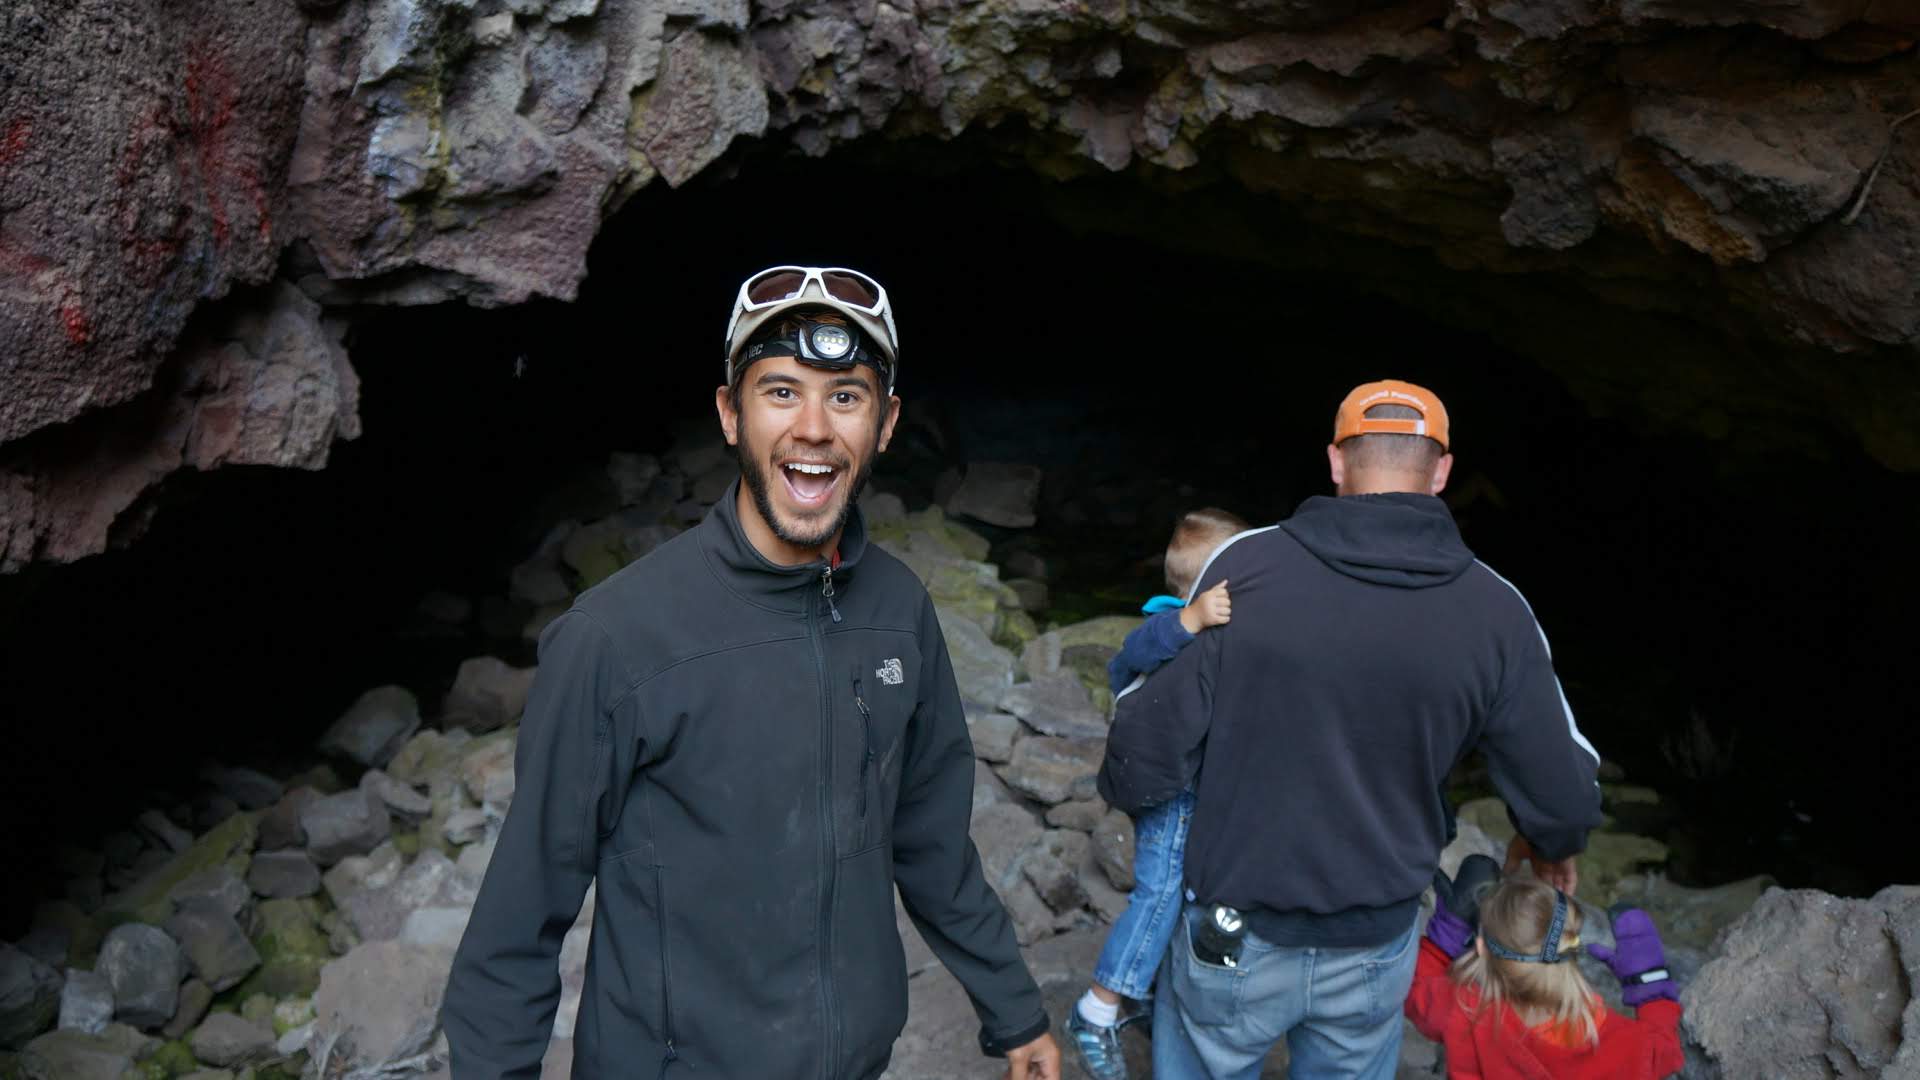 Tom from Mortons on the Move going spelunking